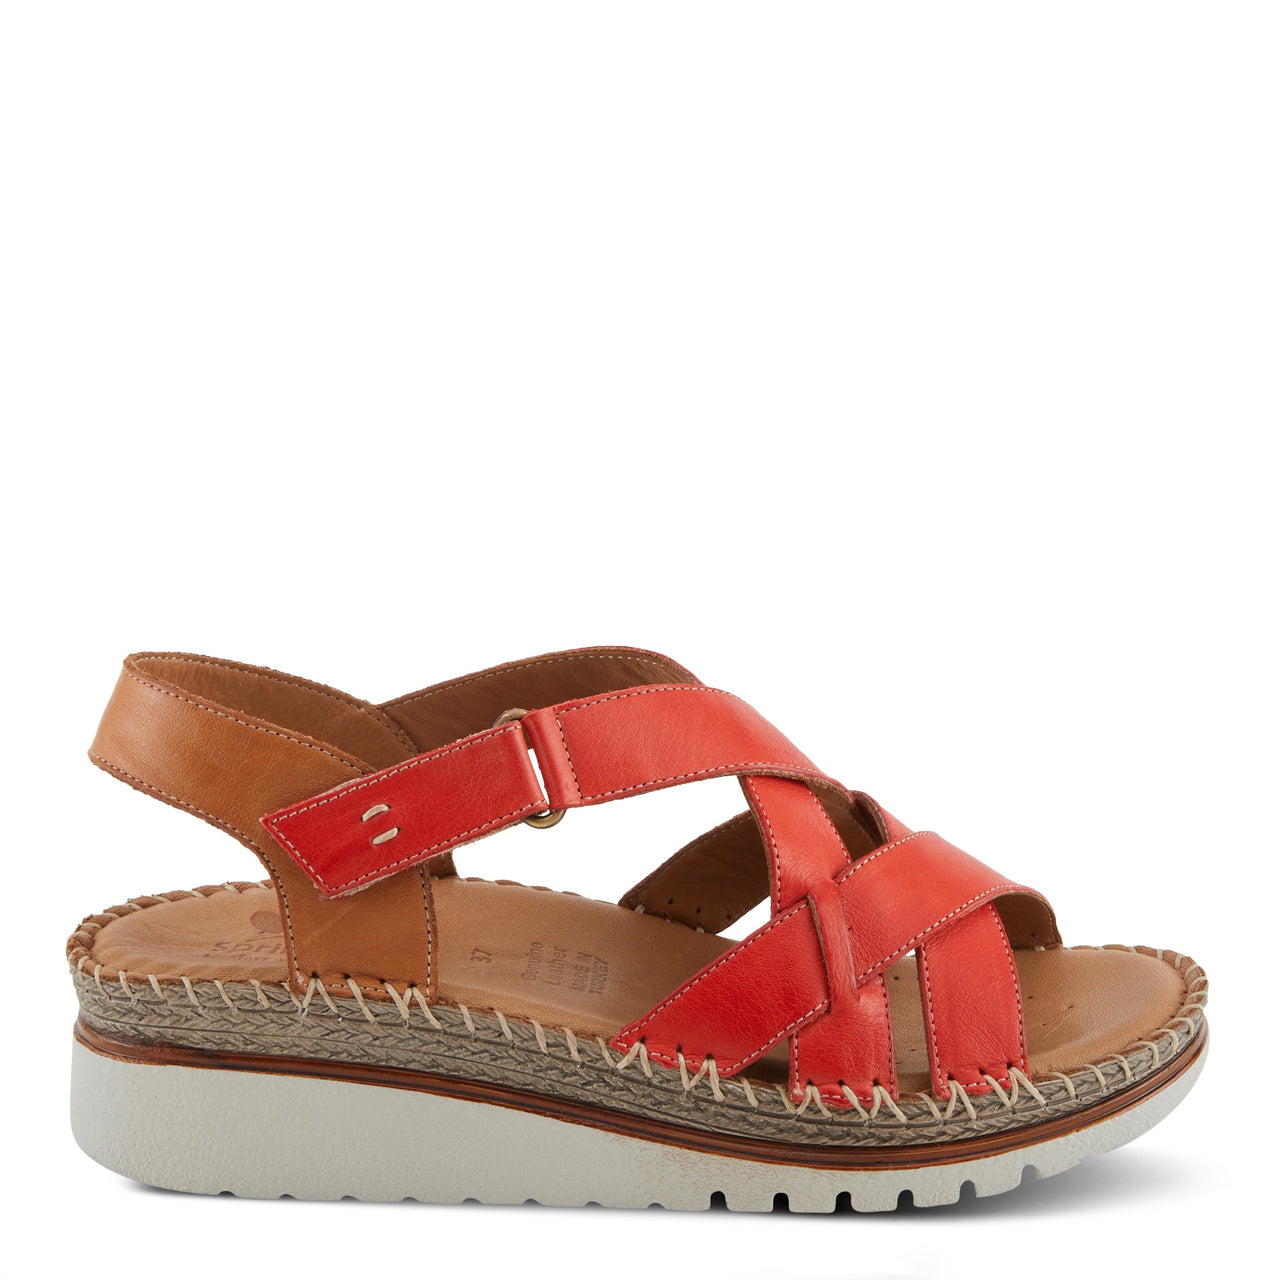 Versatile Spring Step Migula Sandals with durable outsole and adjustable buckle closure